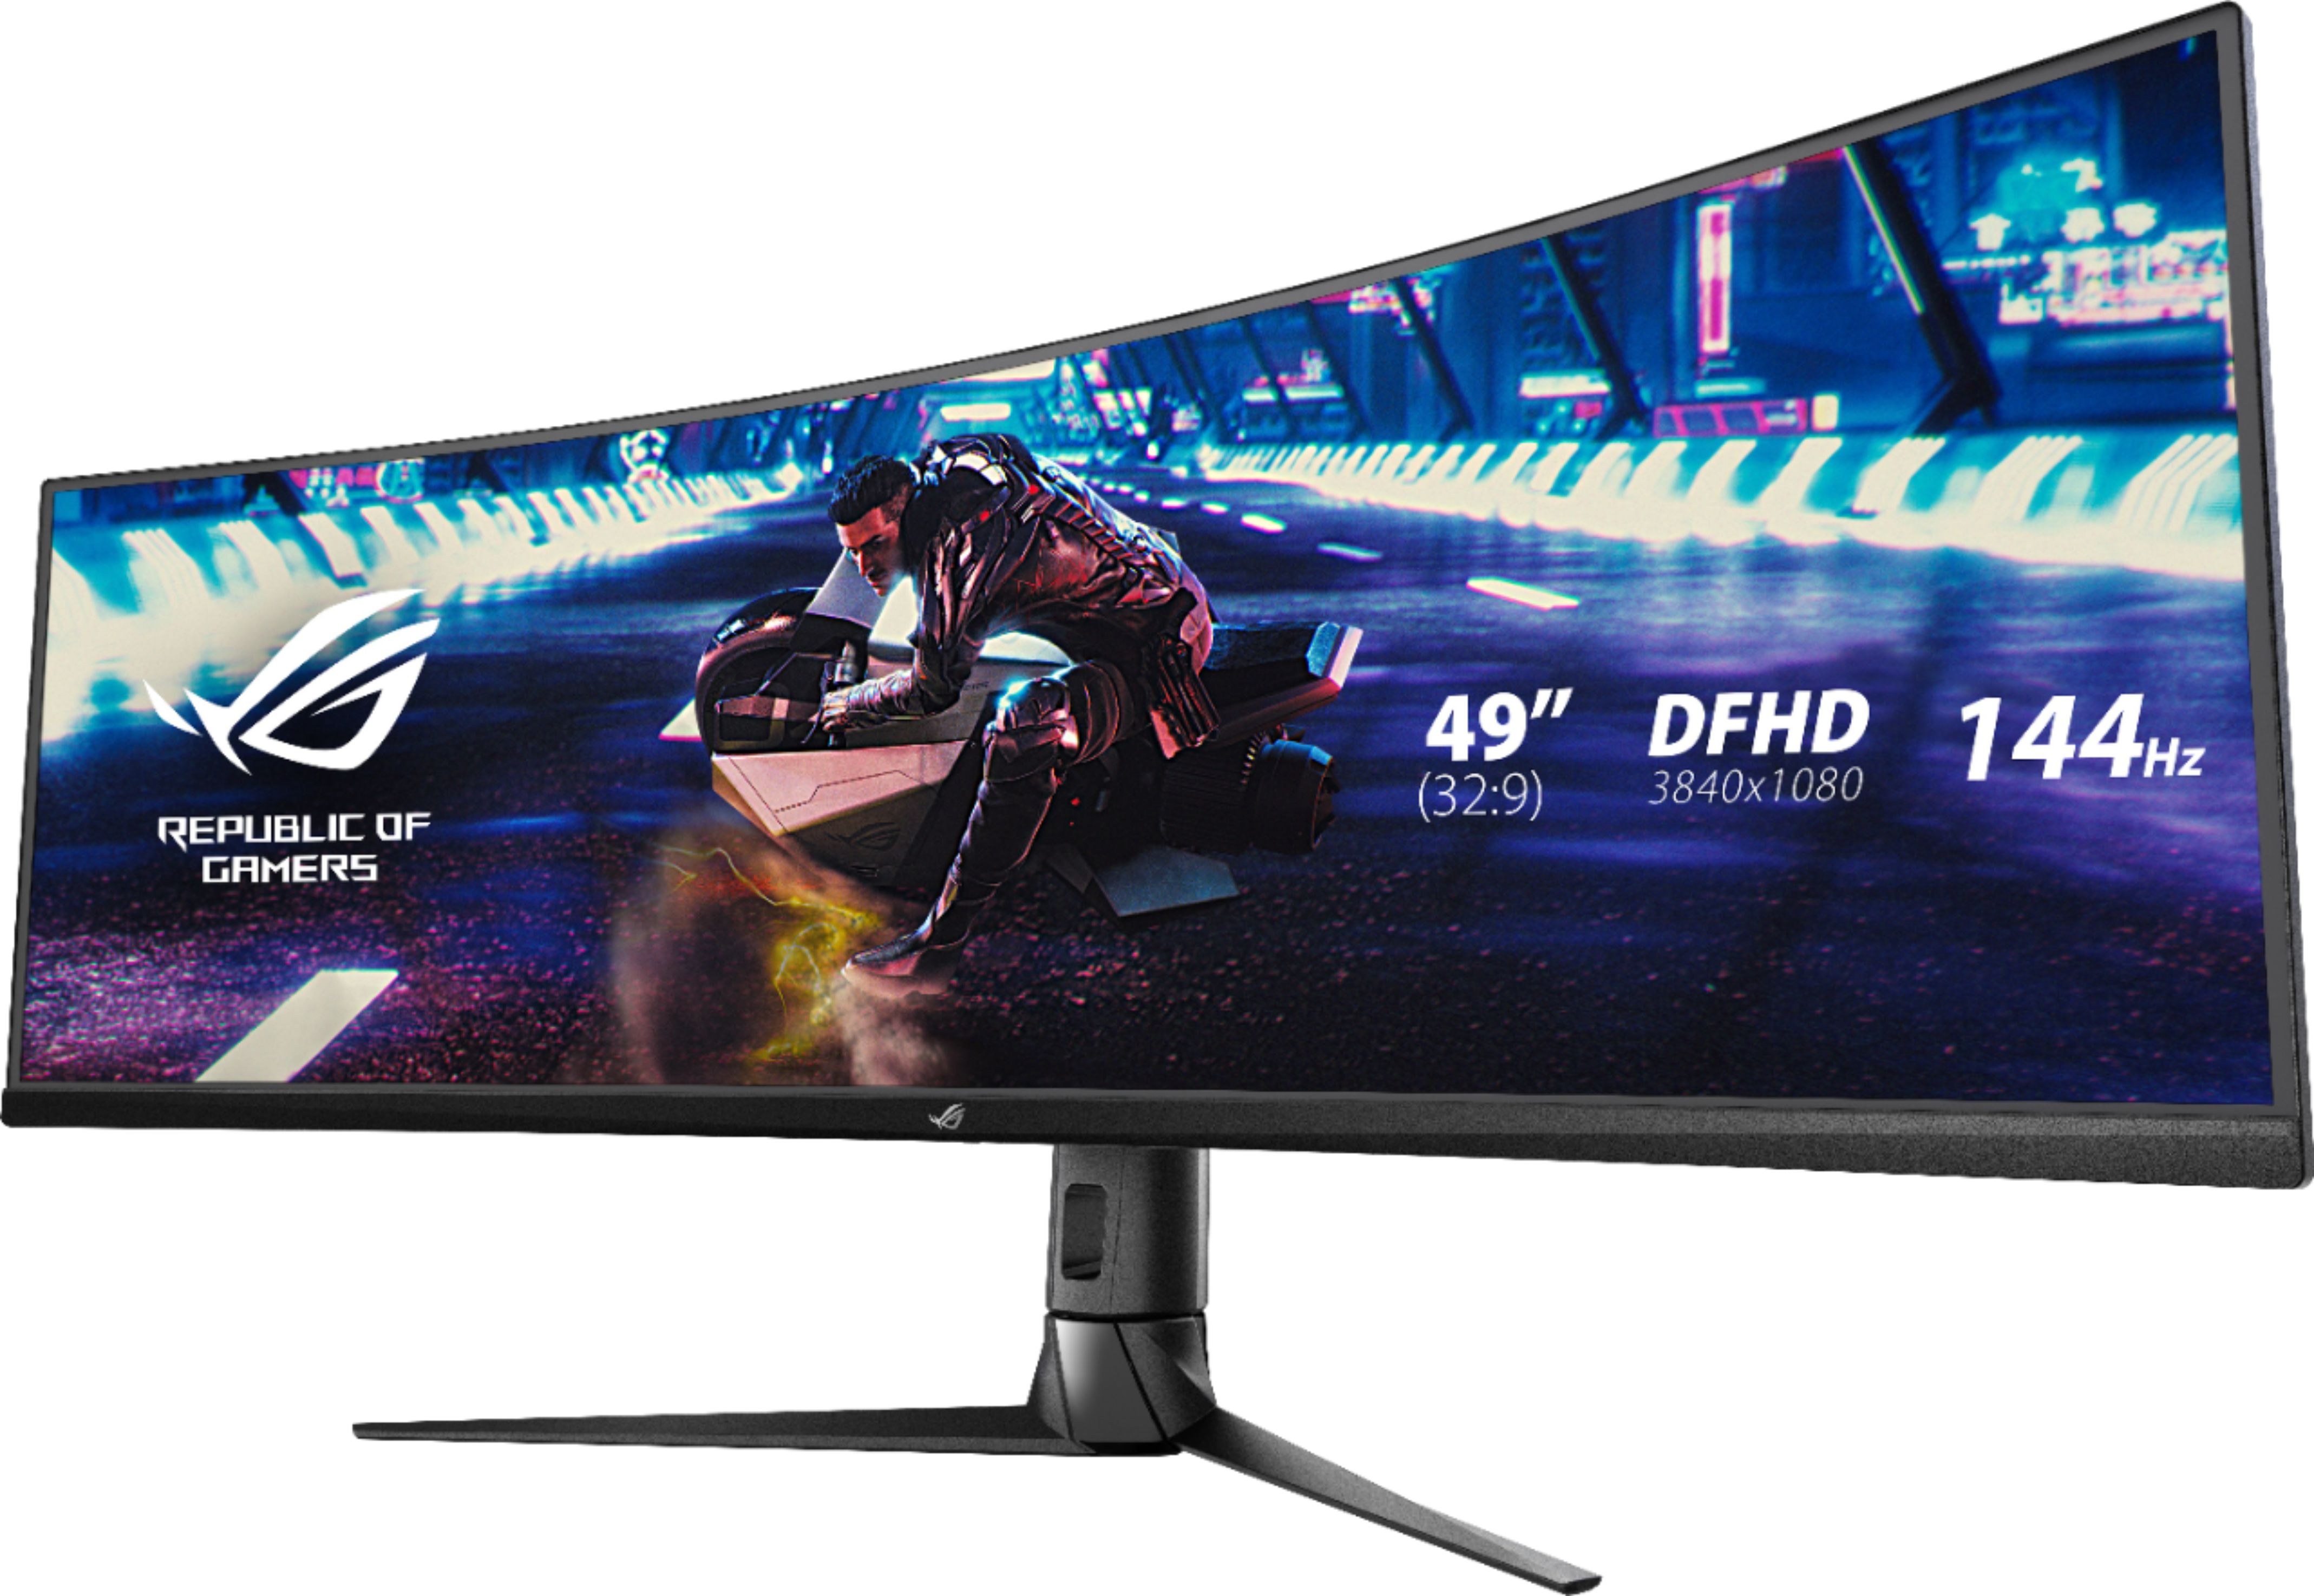 Asus ROG Strix 27 WQHD LED Gaming LCD Monitor for sale online